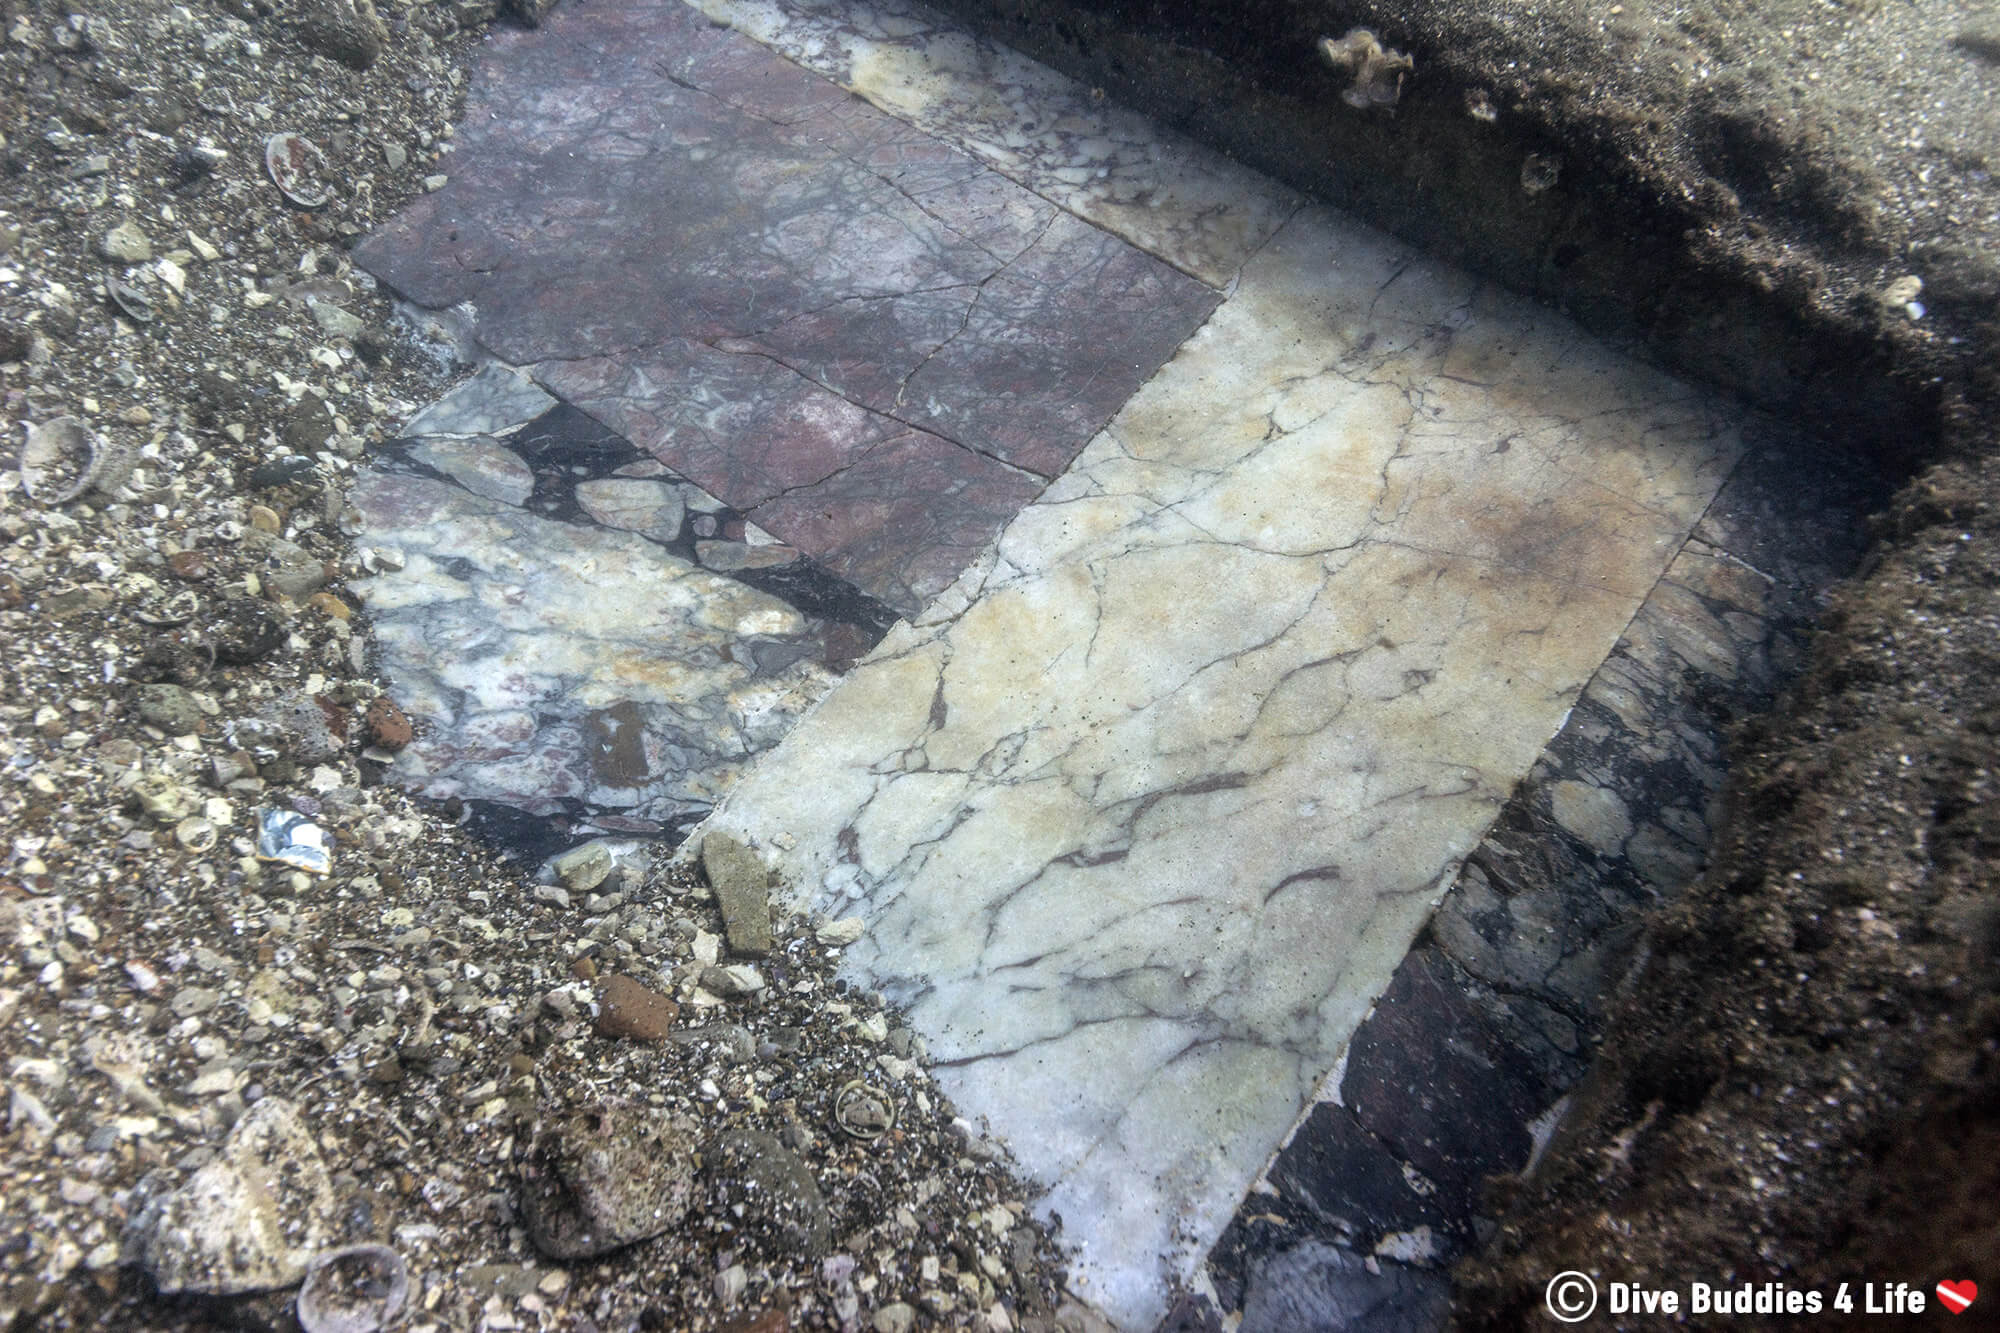 A Sneak Peek At The Marble Mosaic Tile Of The Once Vacation Villa Of Baiae, Now Submerged Under The Sea In The Gulf Of Naples, In Italy, Europe